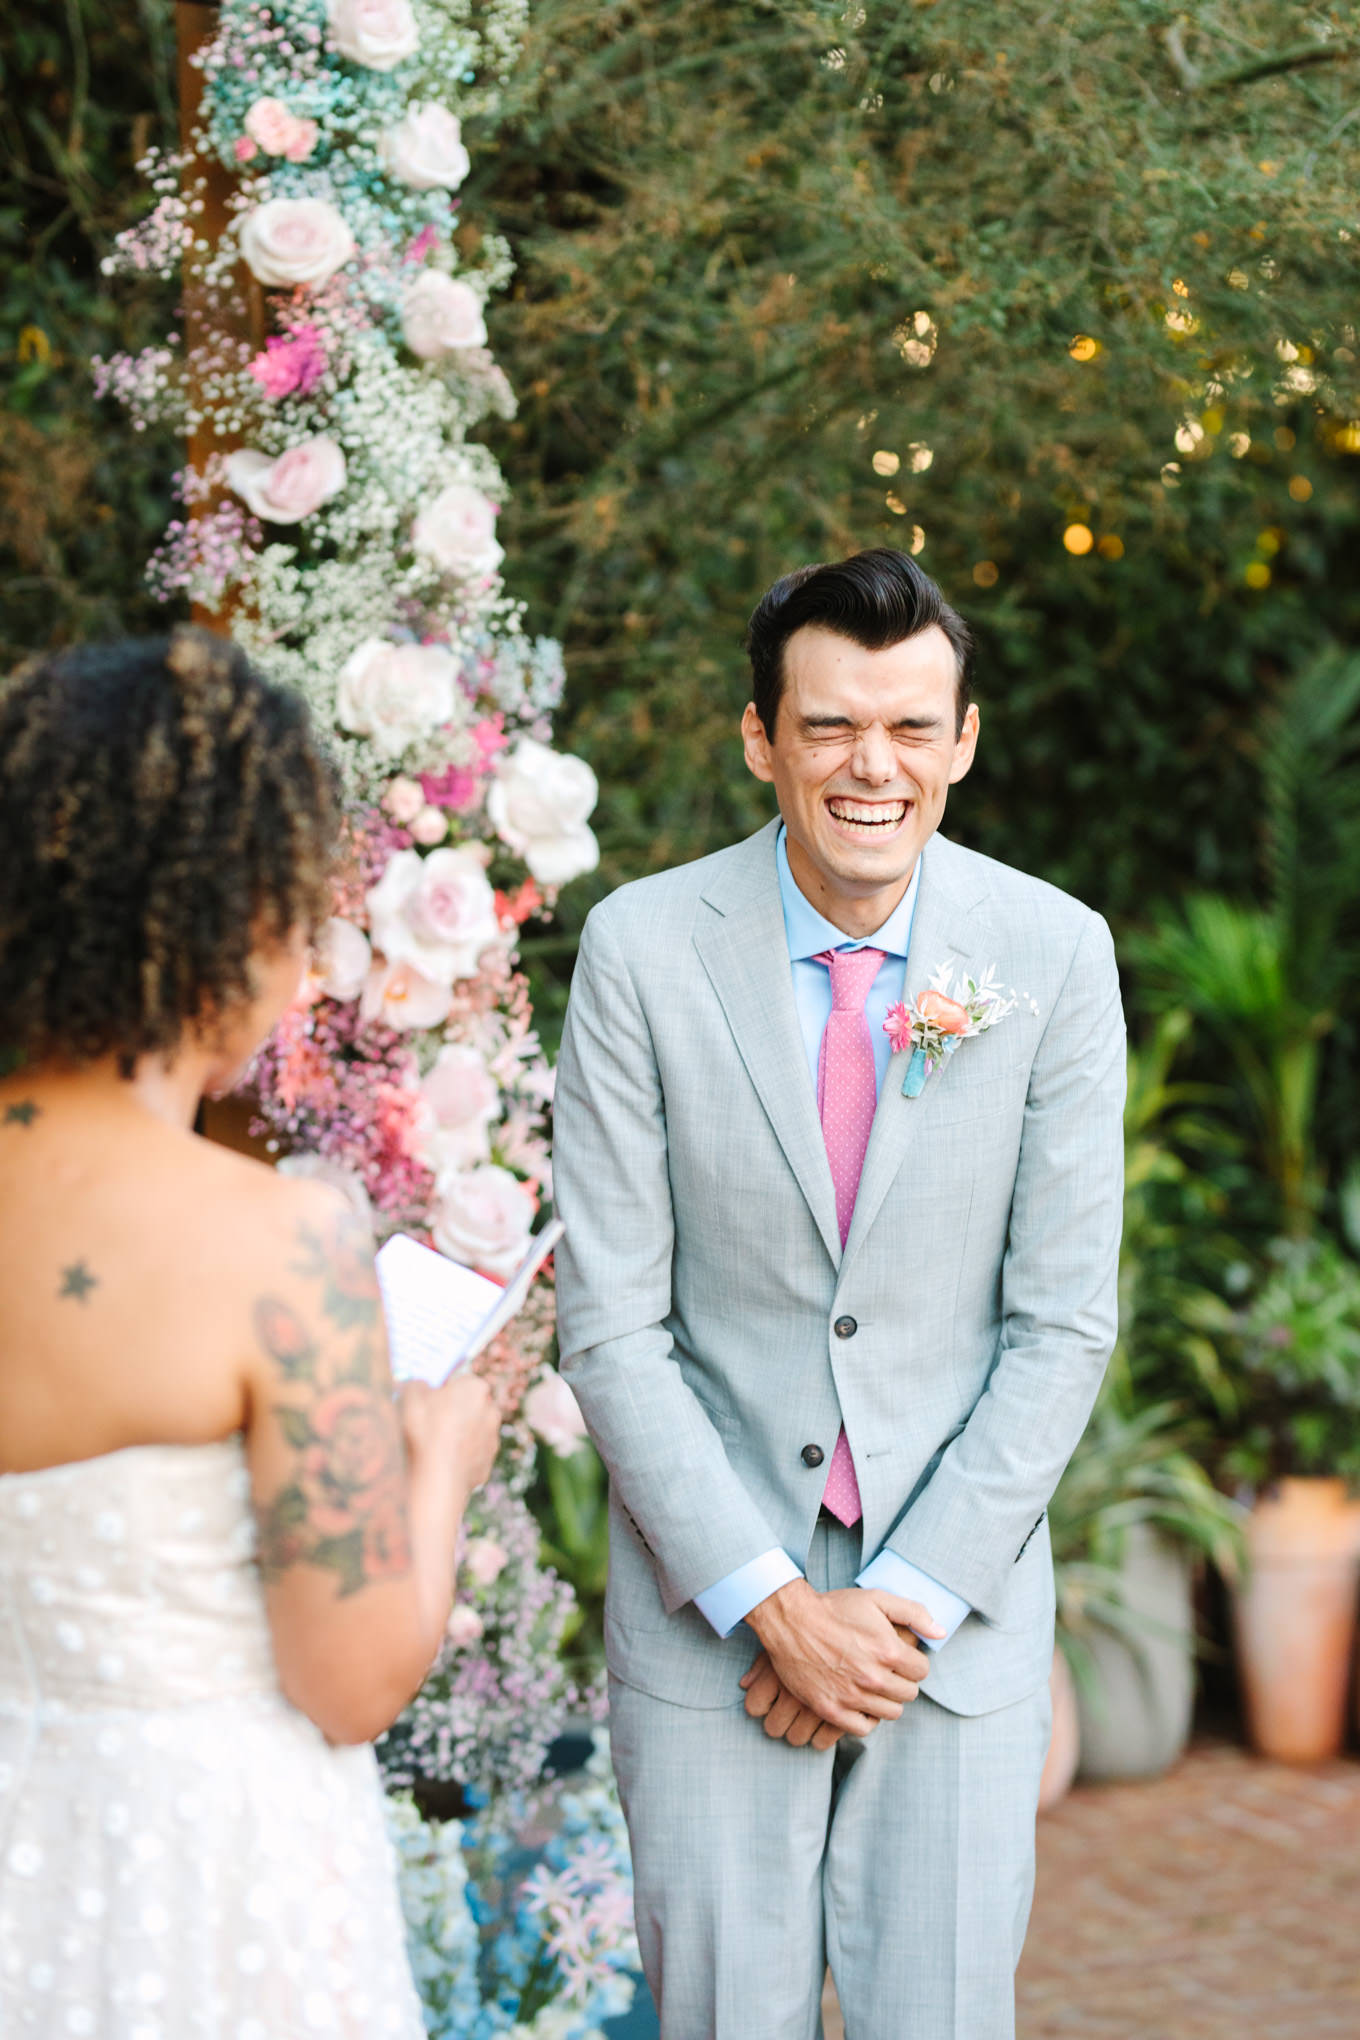 Groom laughing during wedding ceremony | Colorful pop-up micro wedding at The Ruby Street Los Angeles featured on Green Wedding Shoes | Colorful and elevated photography for fun-loving couples in Southern California | #colorfulwedding #popupwedding #weddingphotography #microwedding Source: Mary Costa Photography | Los Angeles